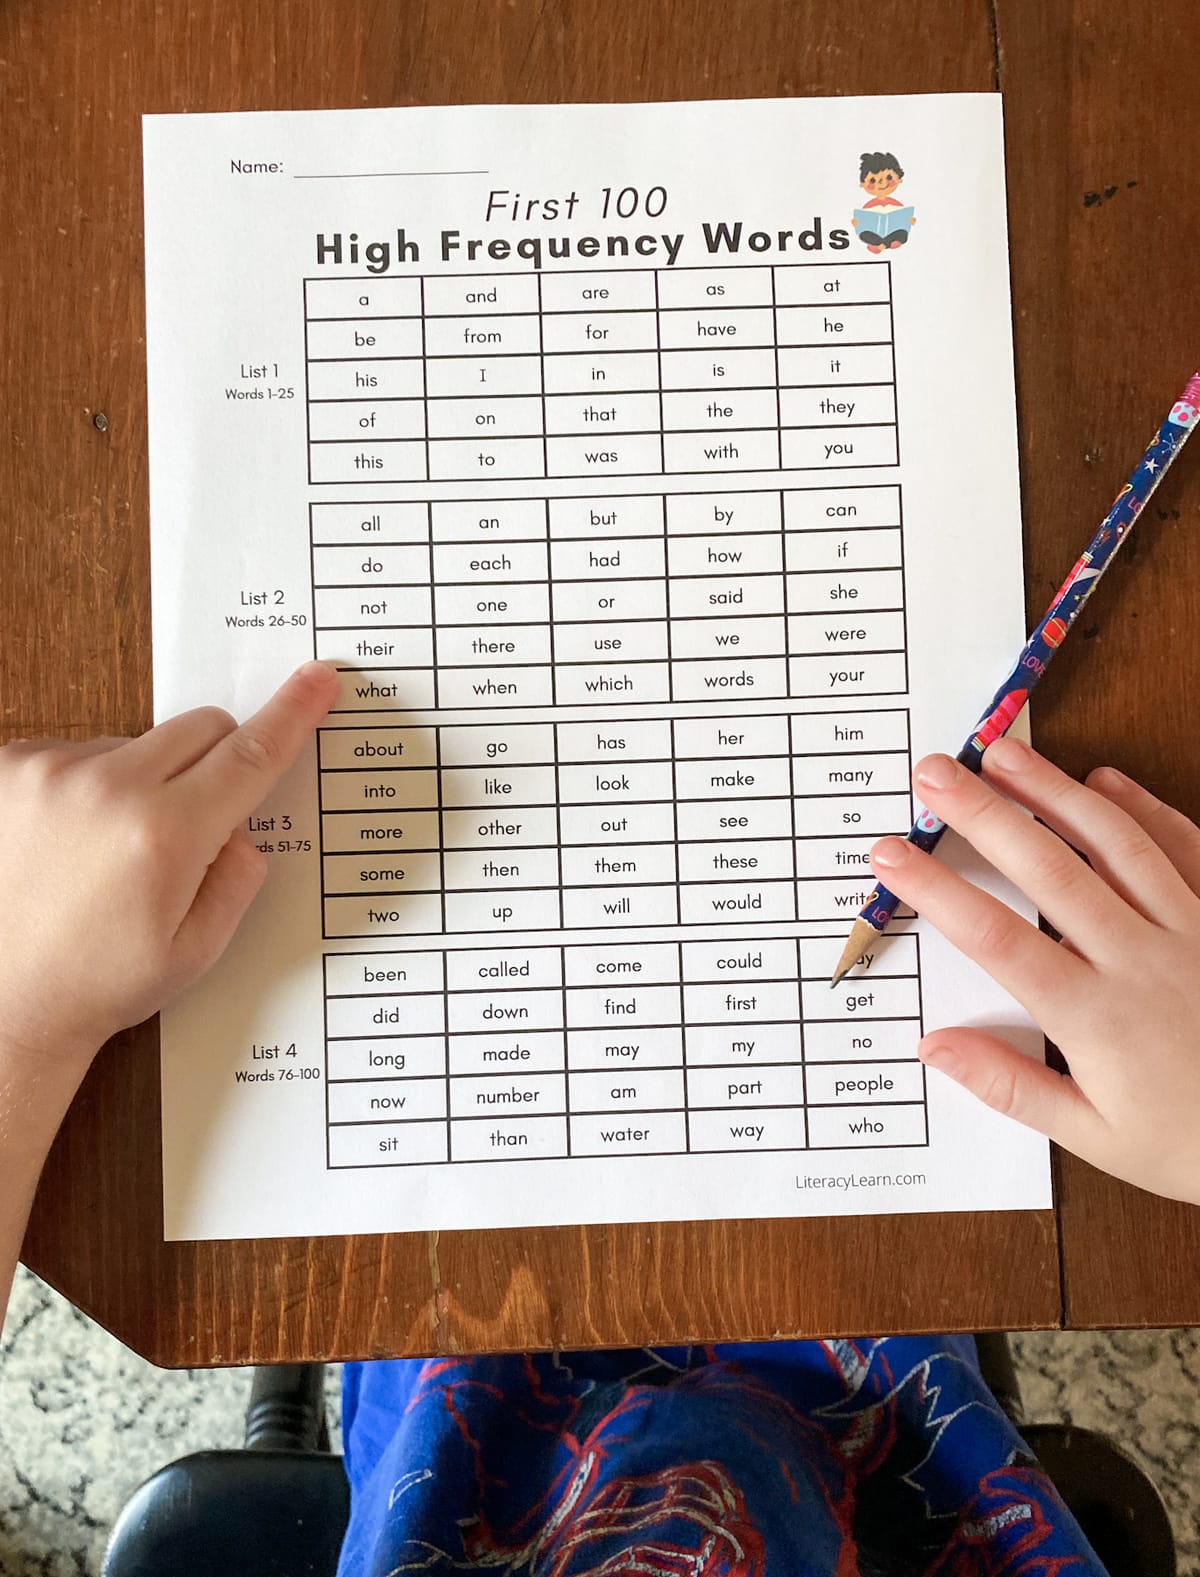 A child's hands pointing to the printed list of 100 High Frequency Words.